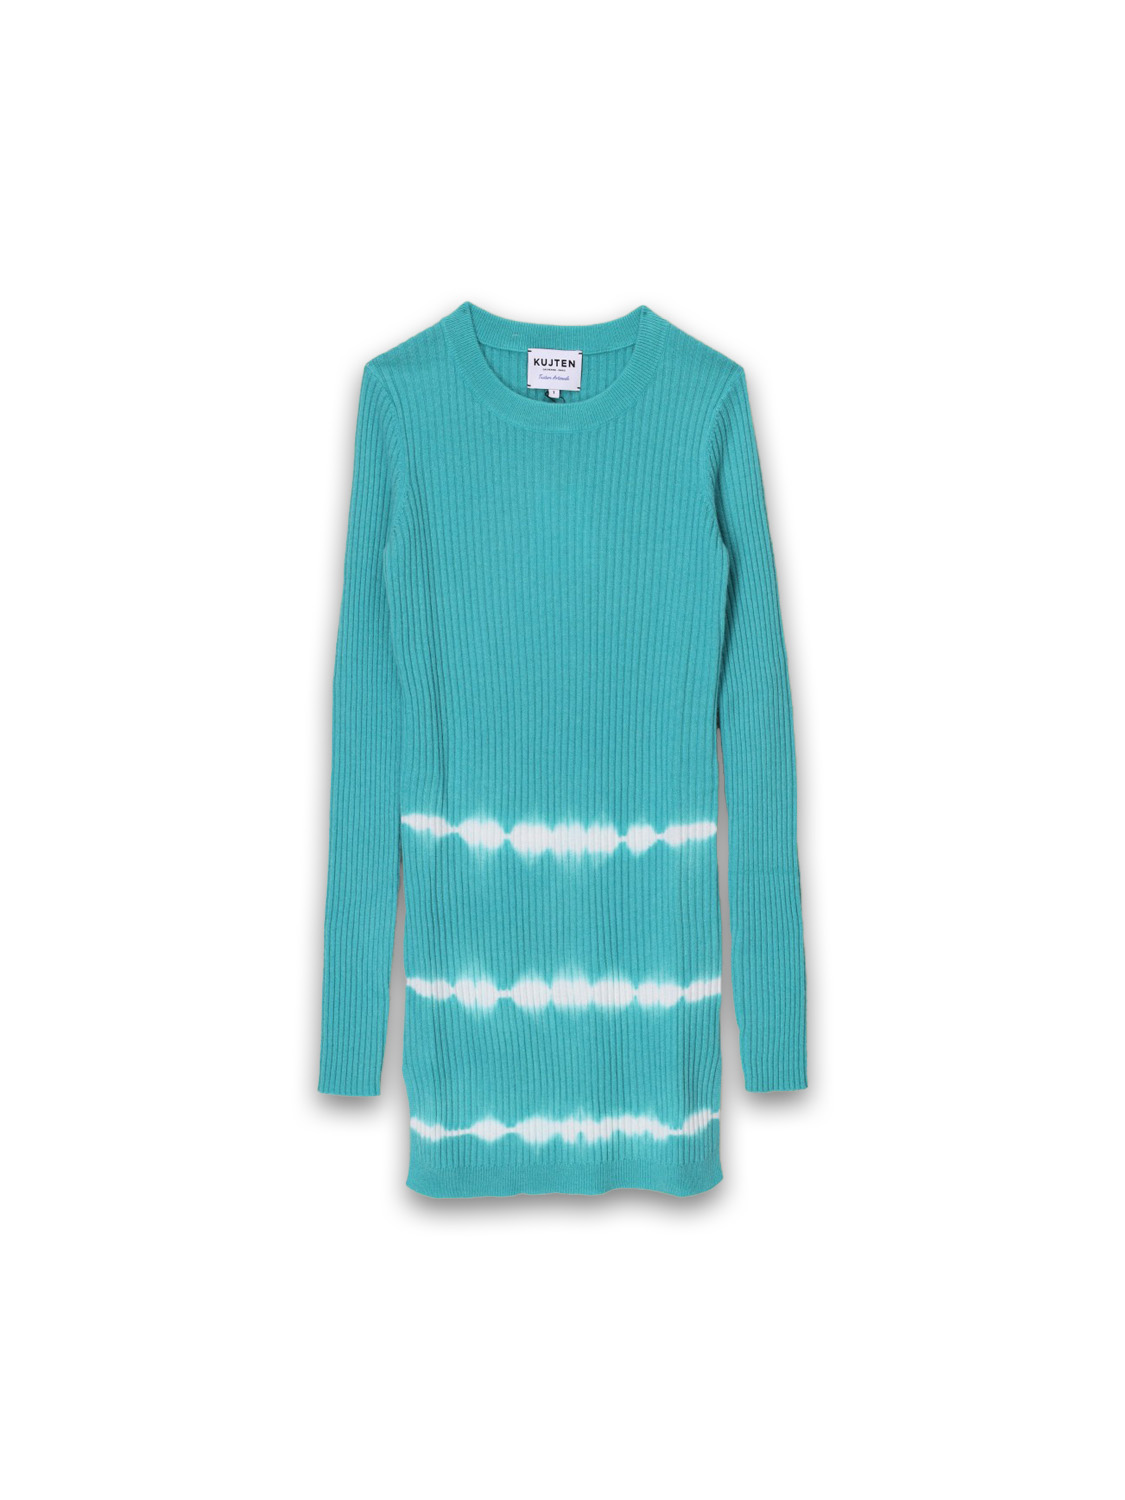 Bibili – Long ribbed cashmere sweater with tie-dye details 